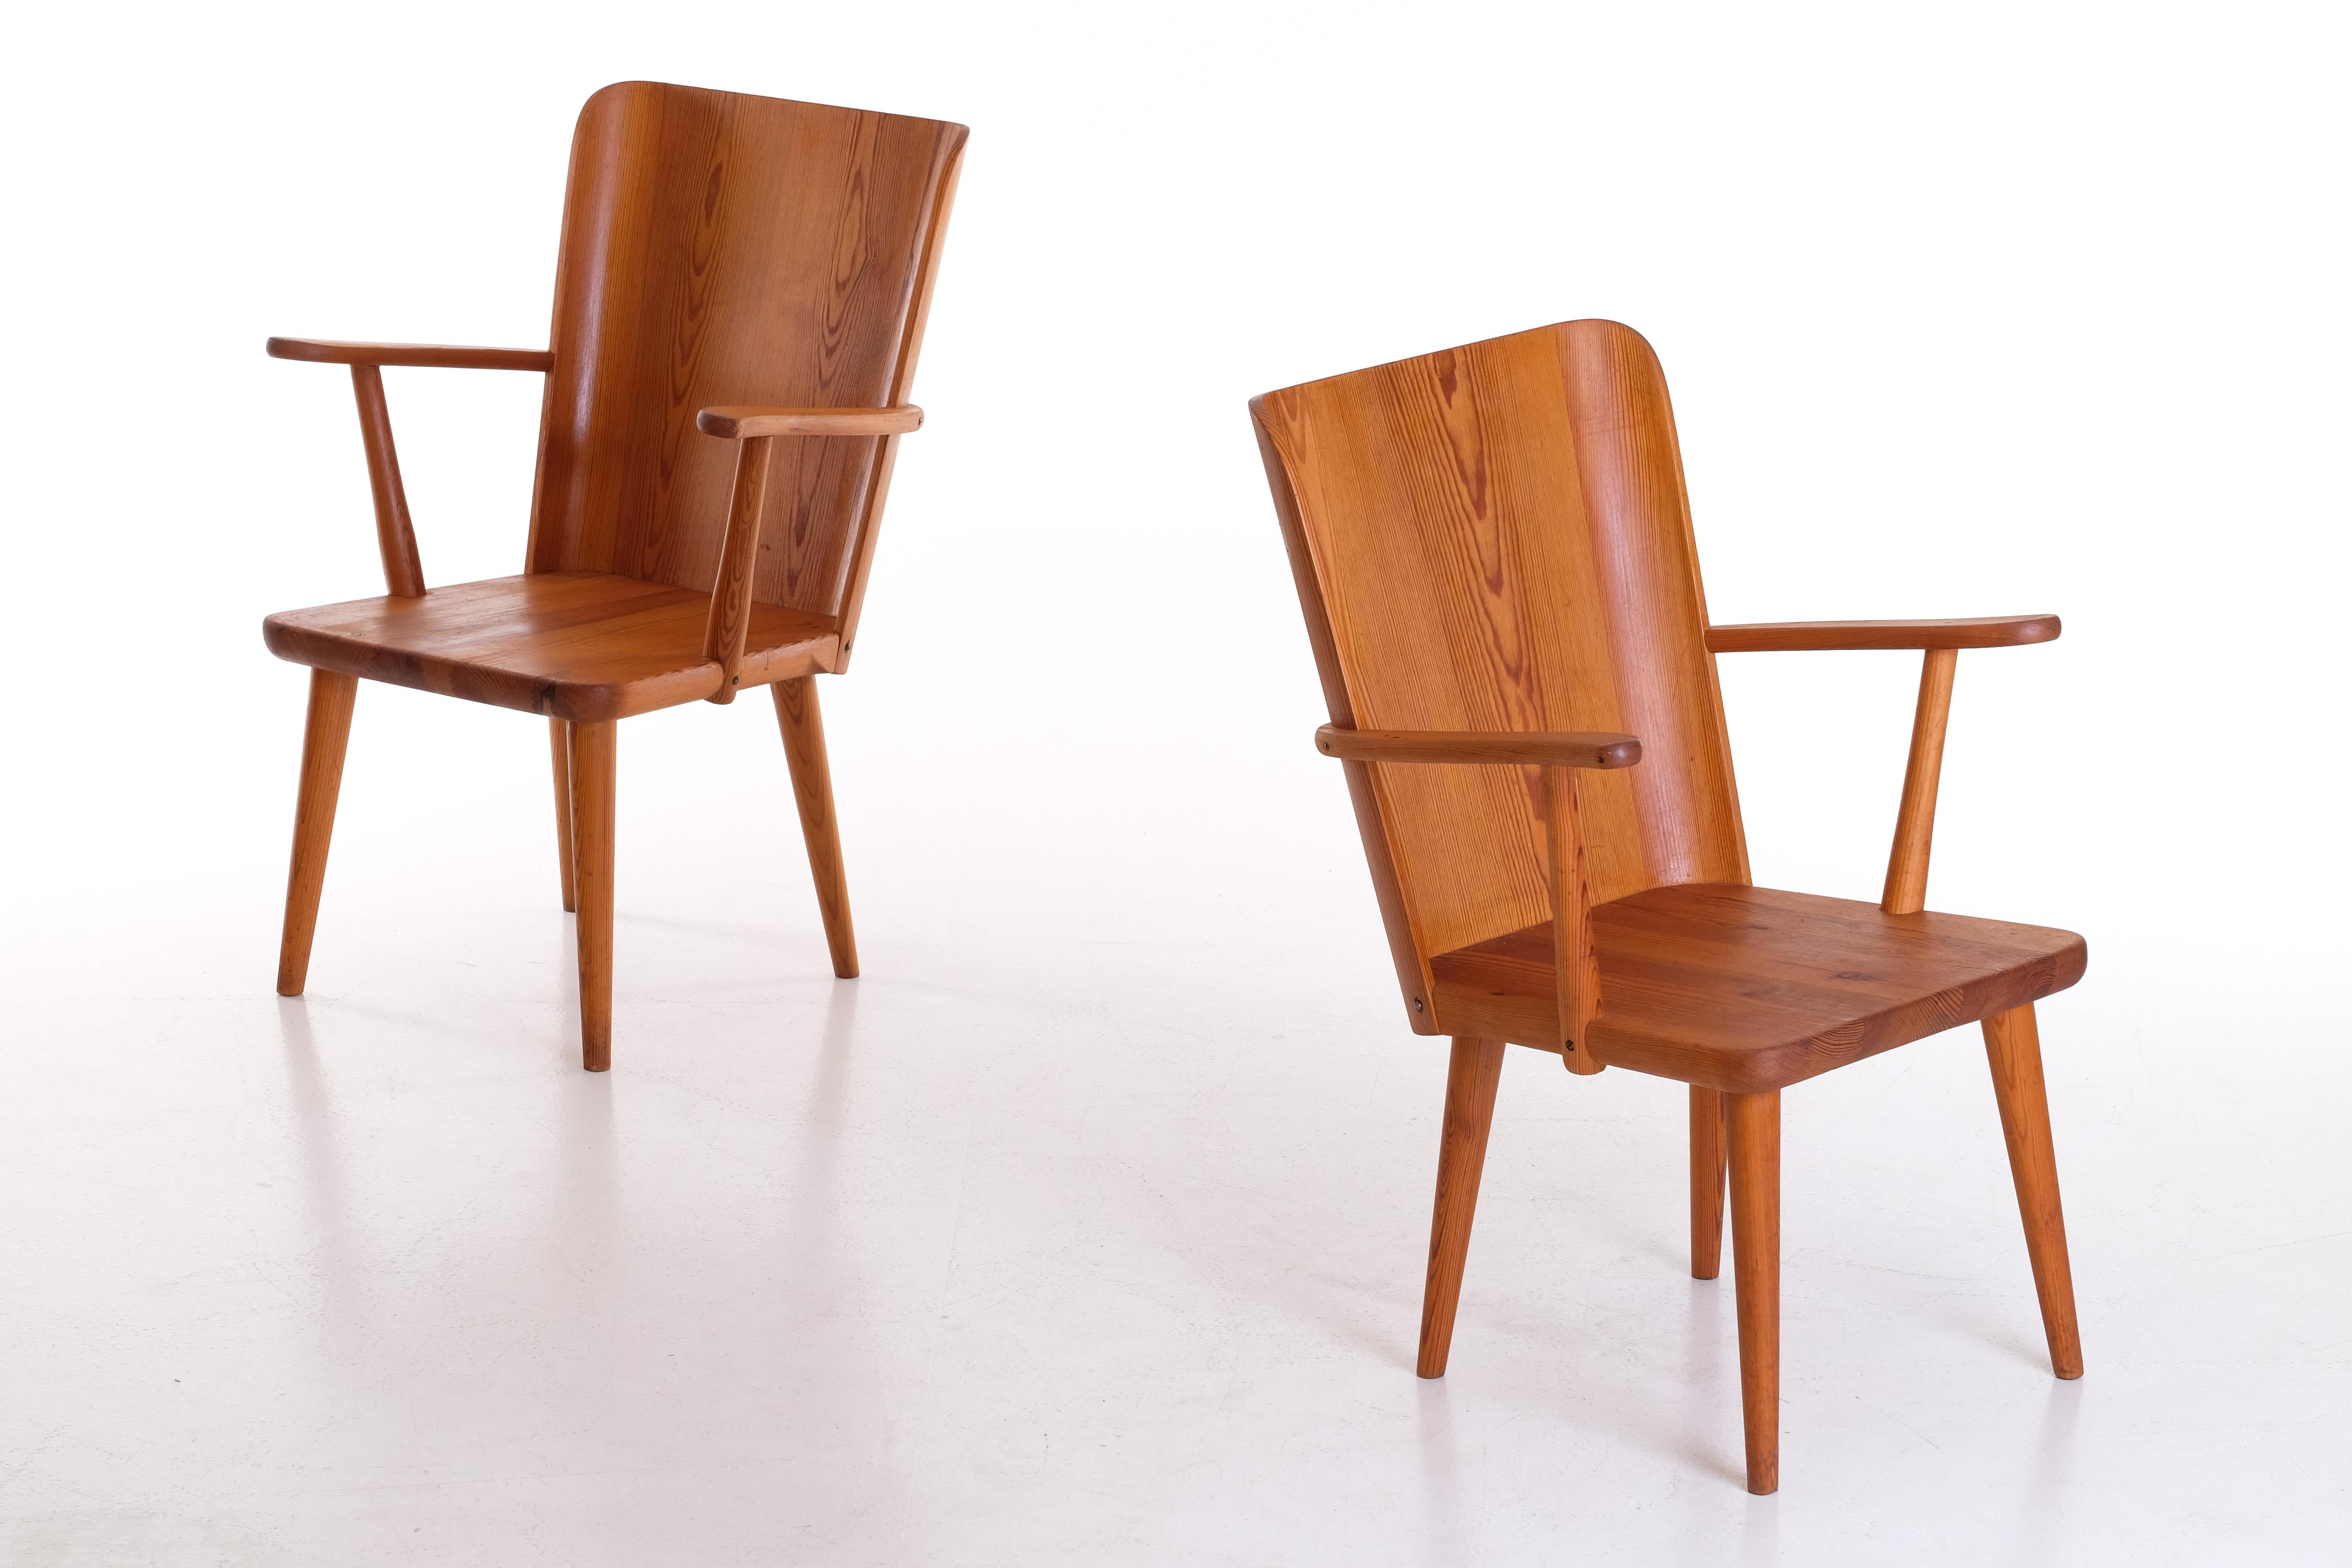 Pair of Swedish Pine Chairs by Göran Malmvall, 1950s In Good Condition For Sale In Stockholm, SE